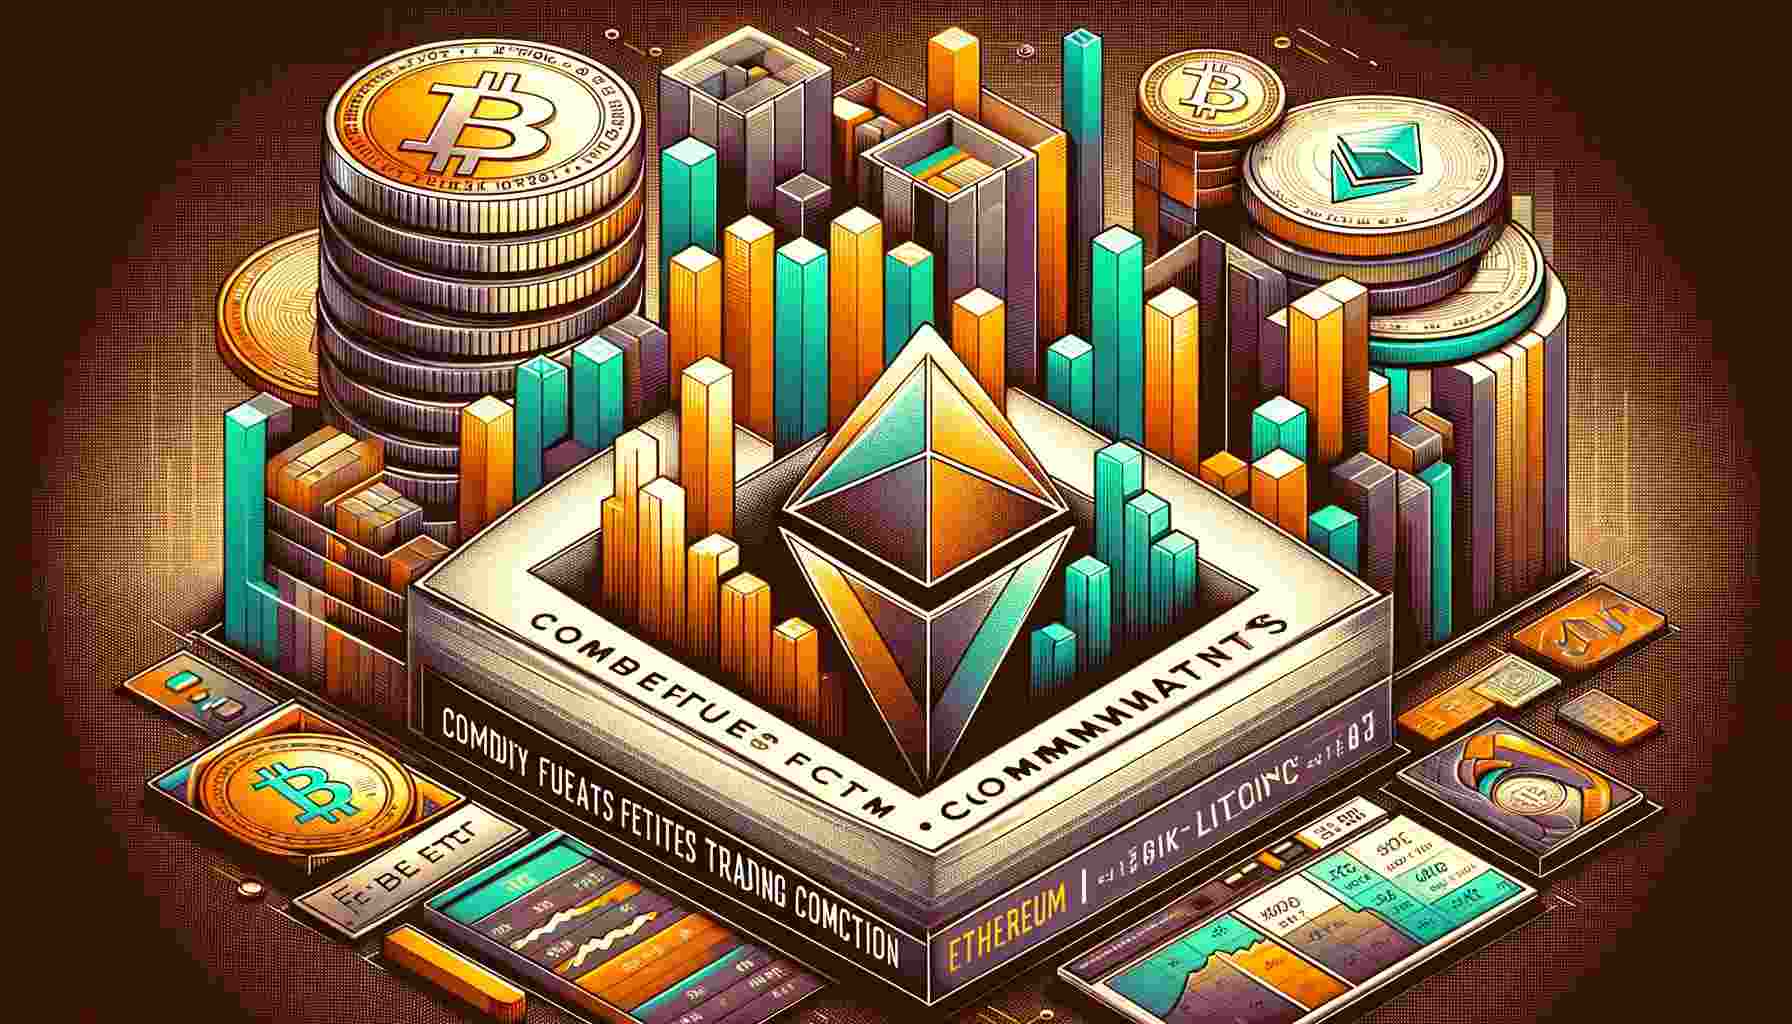 CFTC: Ethereum, Bitcoin, Litecoin are ‘commodities’ – Why?